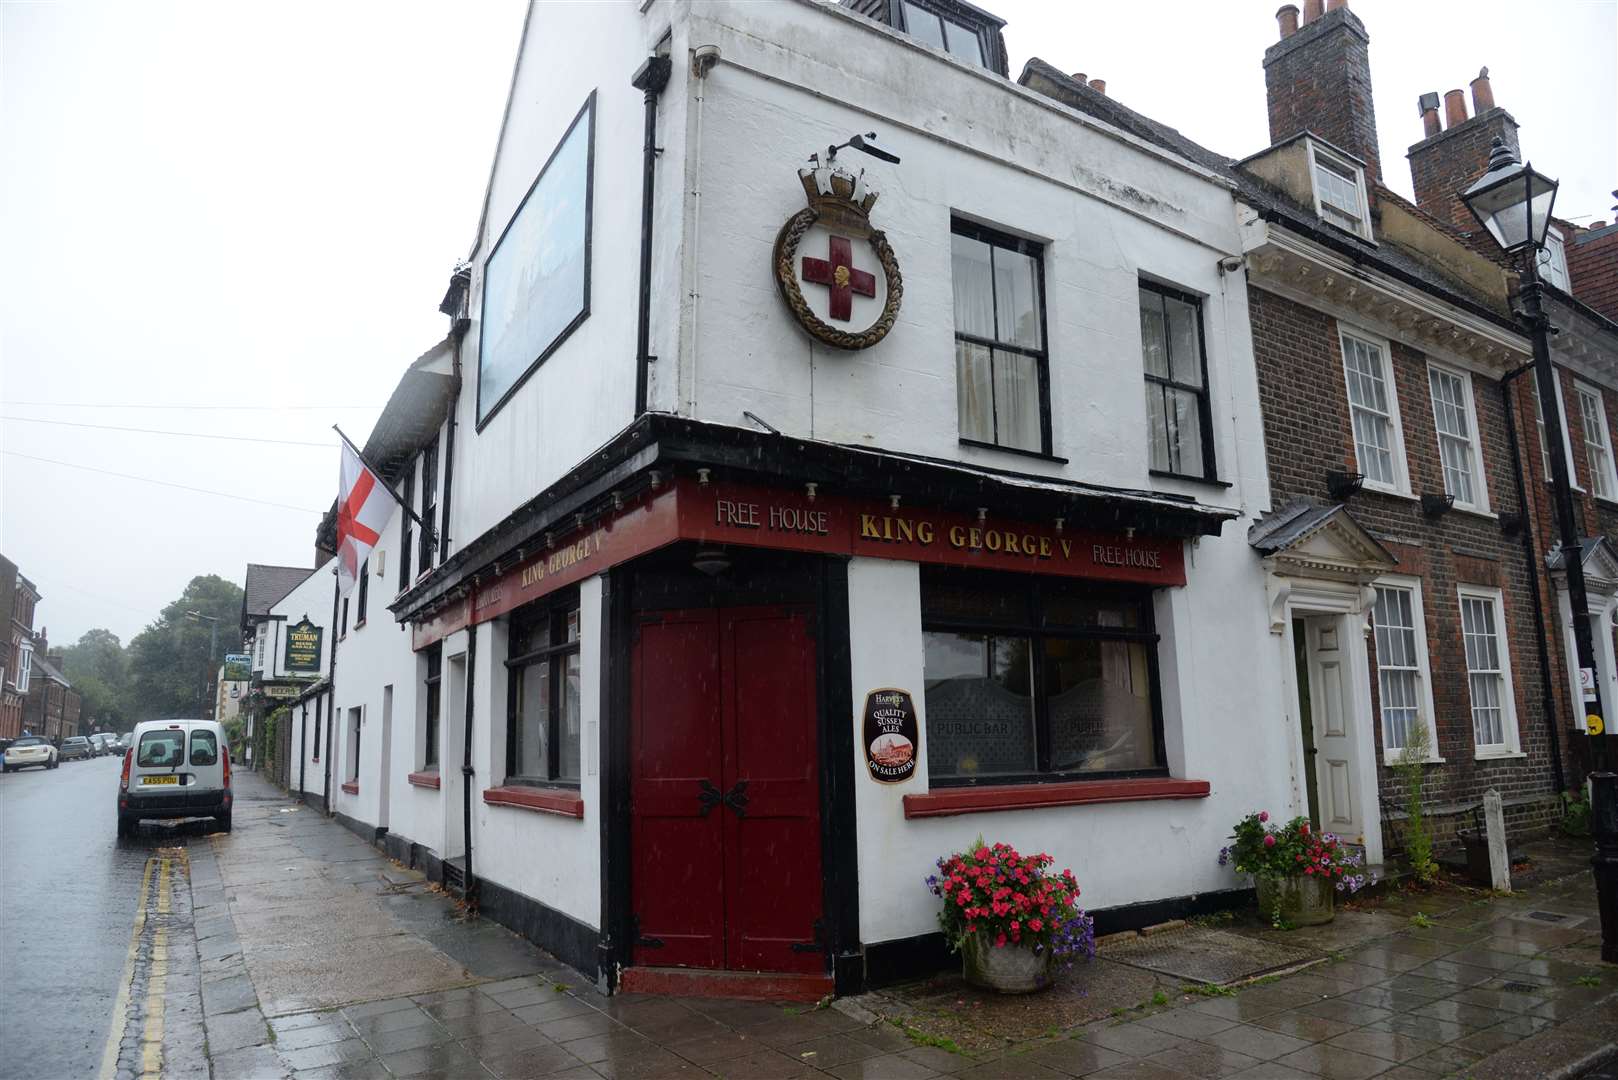 The King George V public house in Brompton Picture: Chris Davey